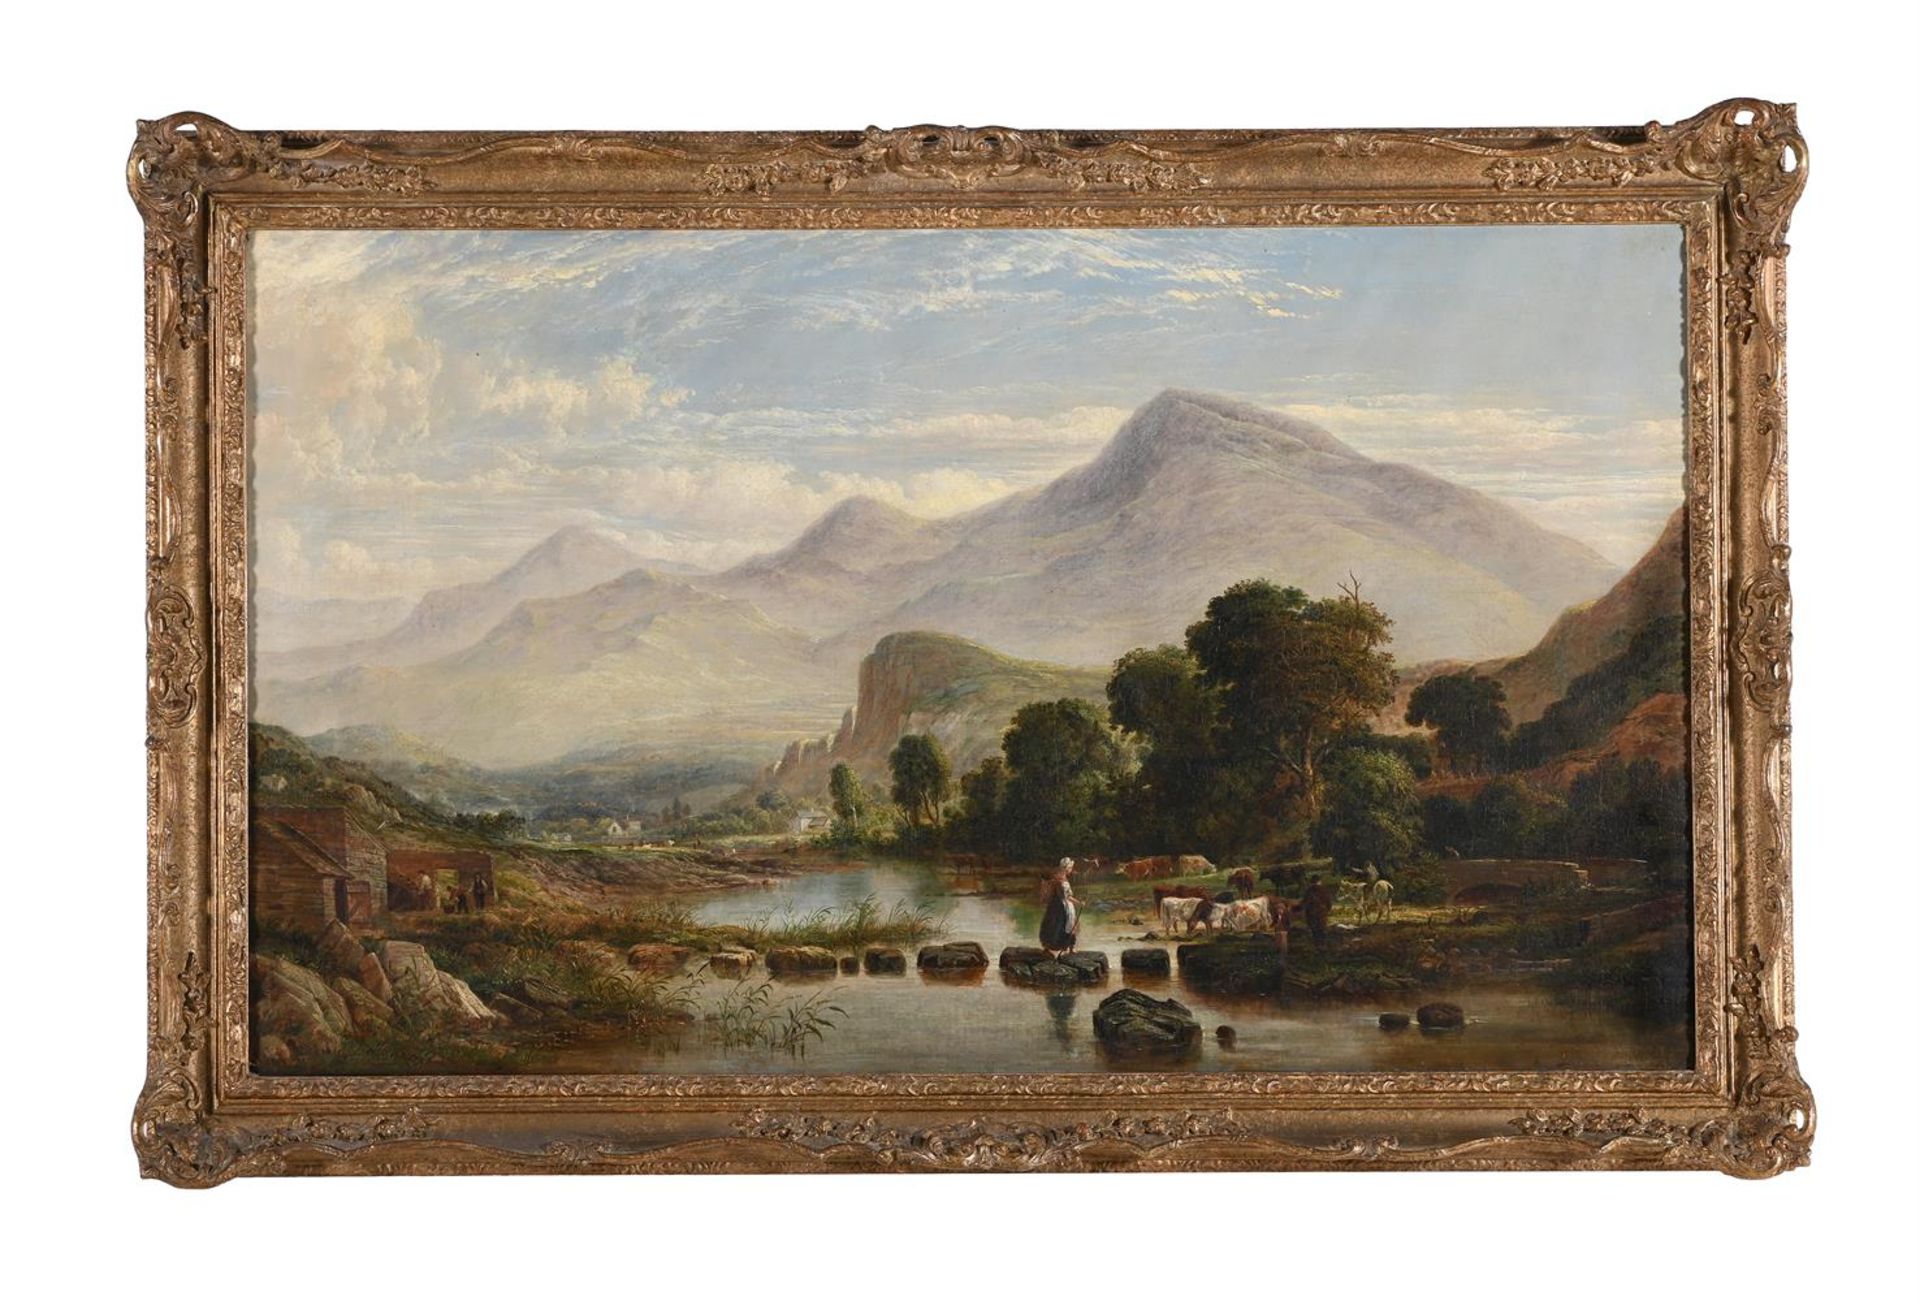 ATTRIBUTED TO ADAM BARLAND (BRITISH FL. 1843-1885), AN EXTENSIVE LANDSCAPE IN NORTH WALES - Image 2 of 3